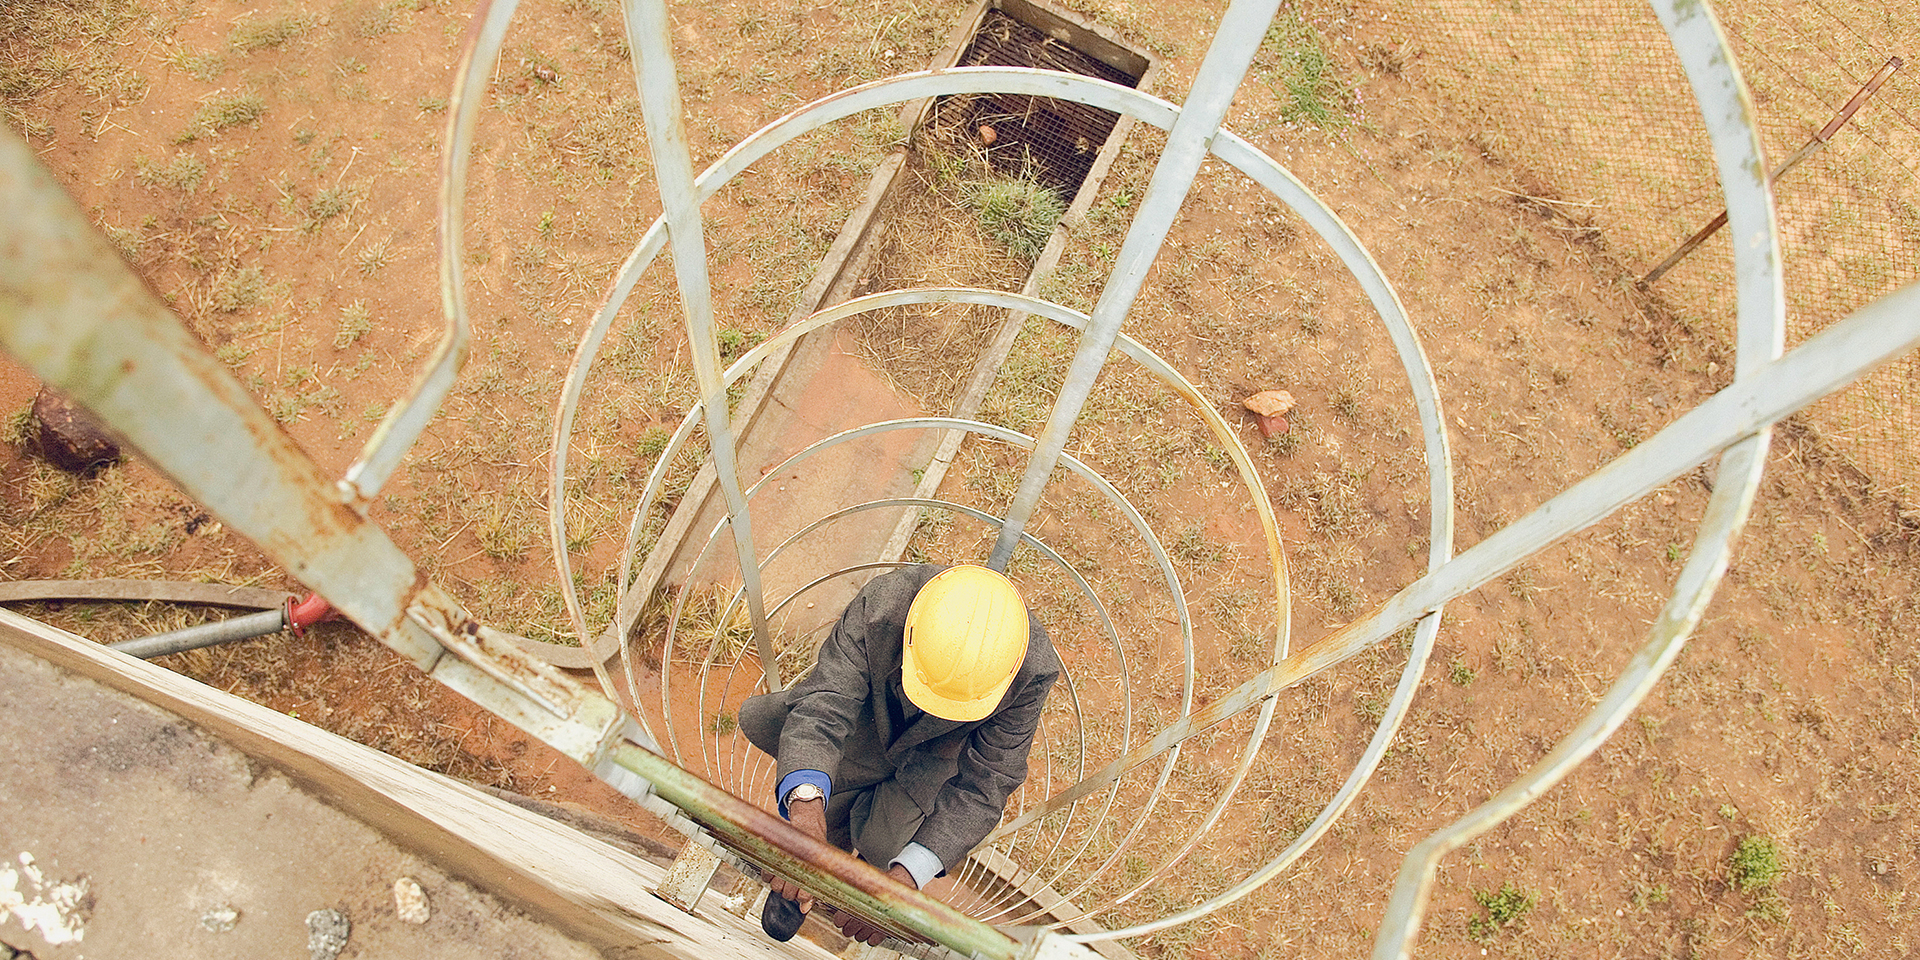 A man in a suit climbing the ladder of a water reservoir.